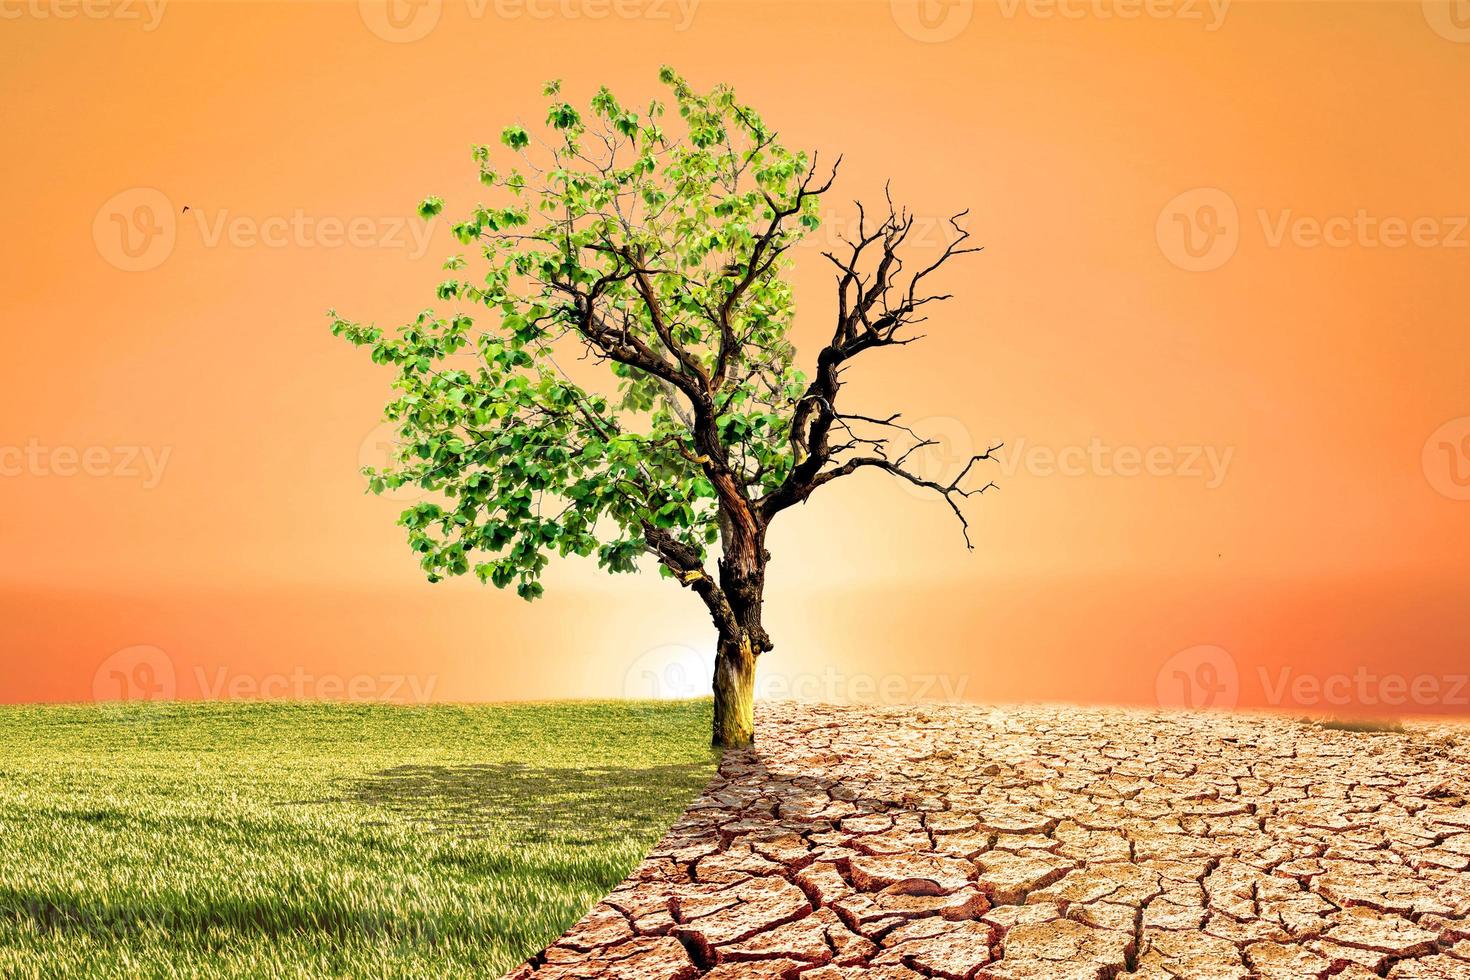 Global warming concept image showing the effects of dry land photo